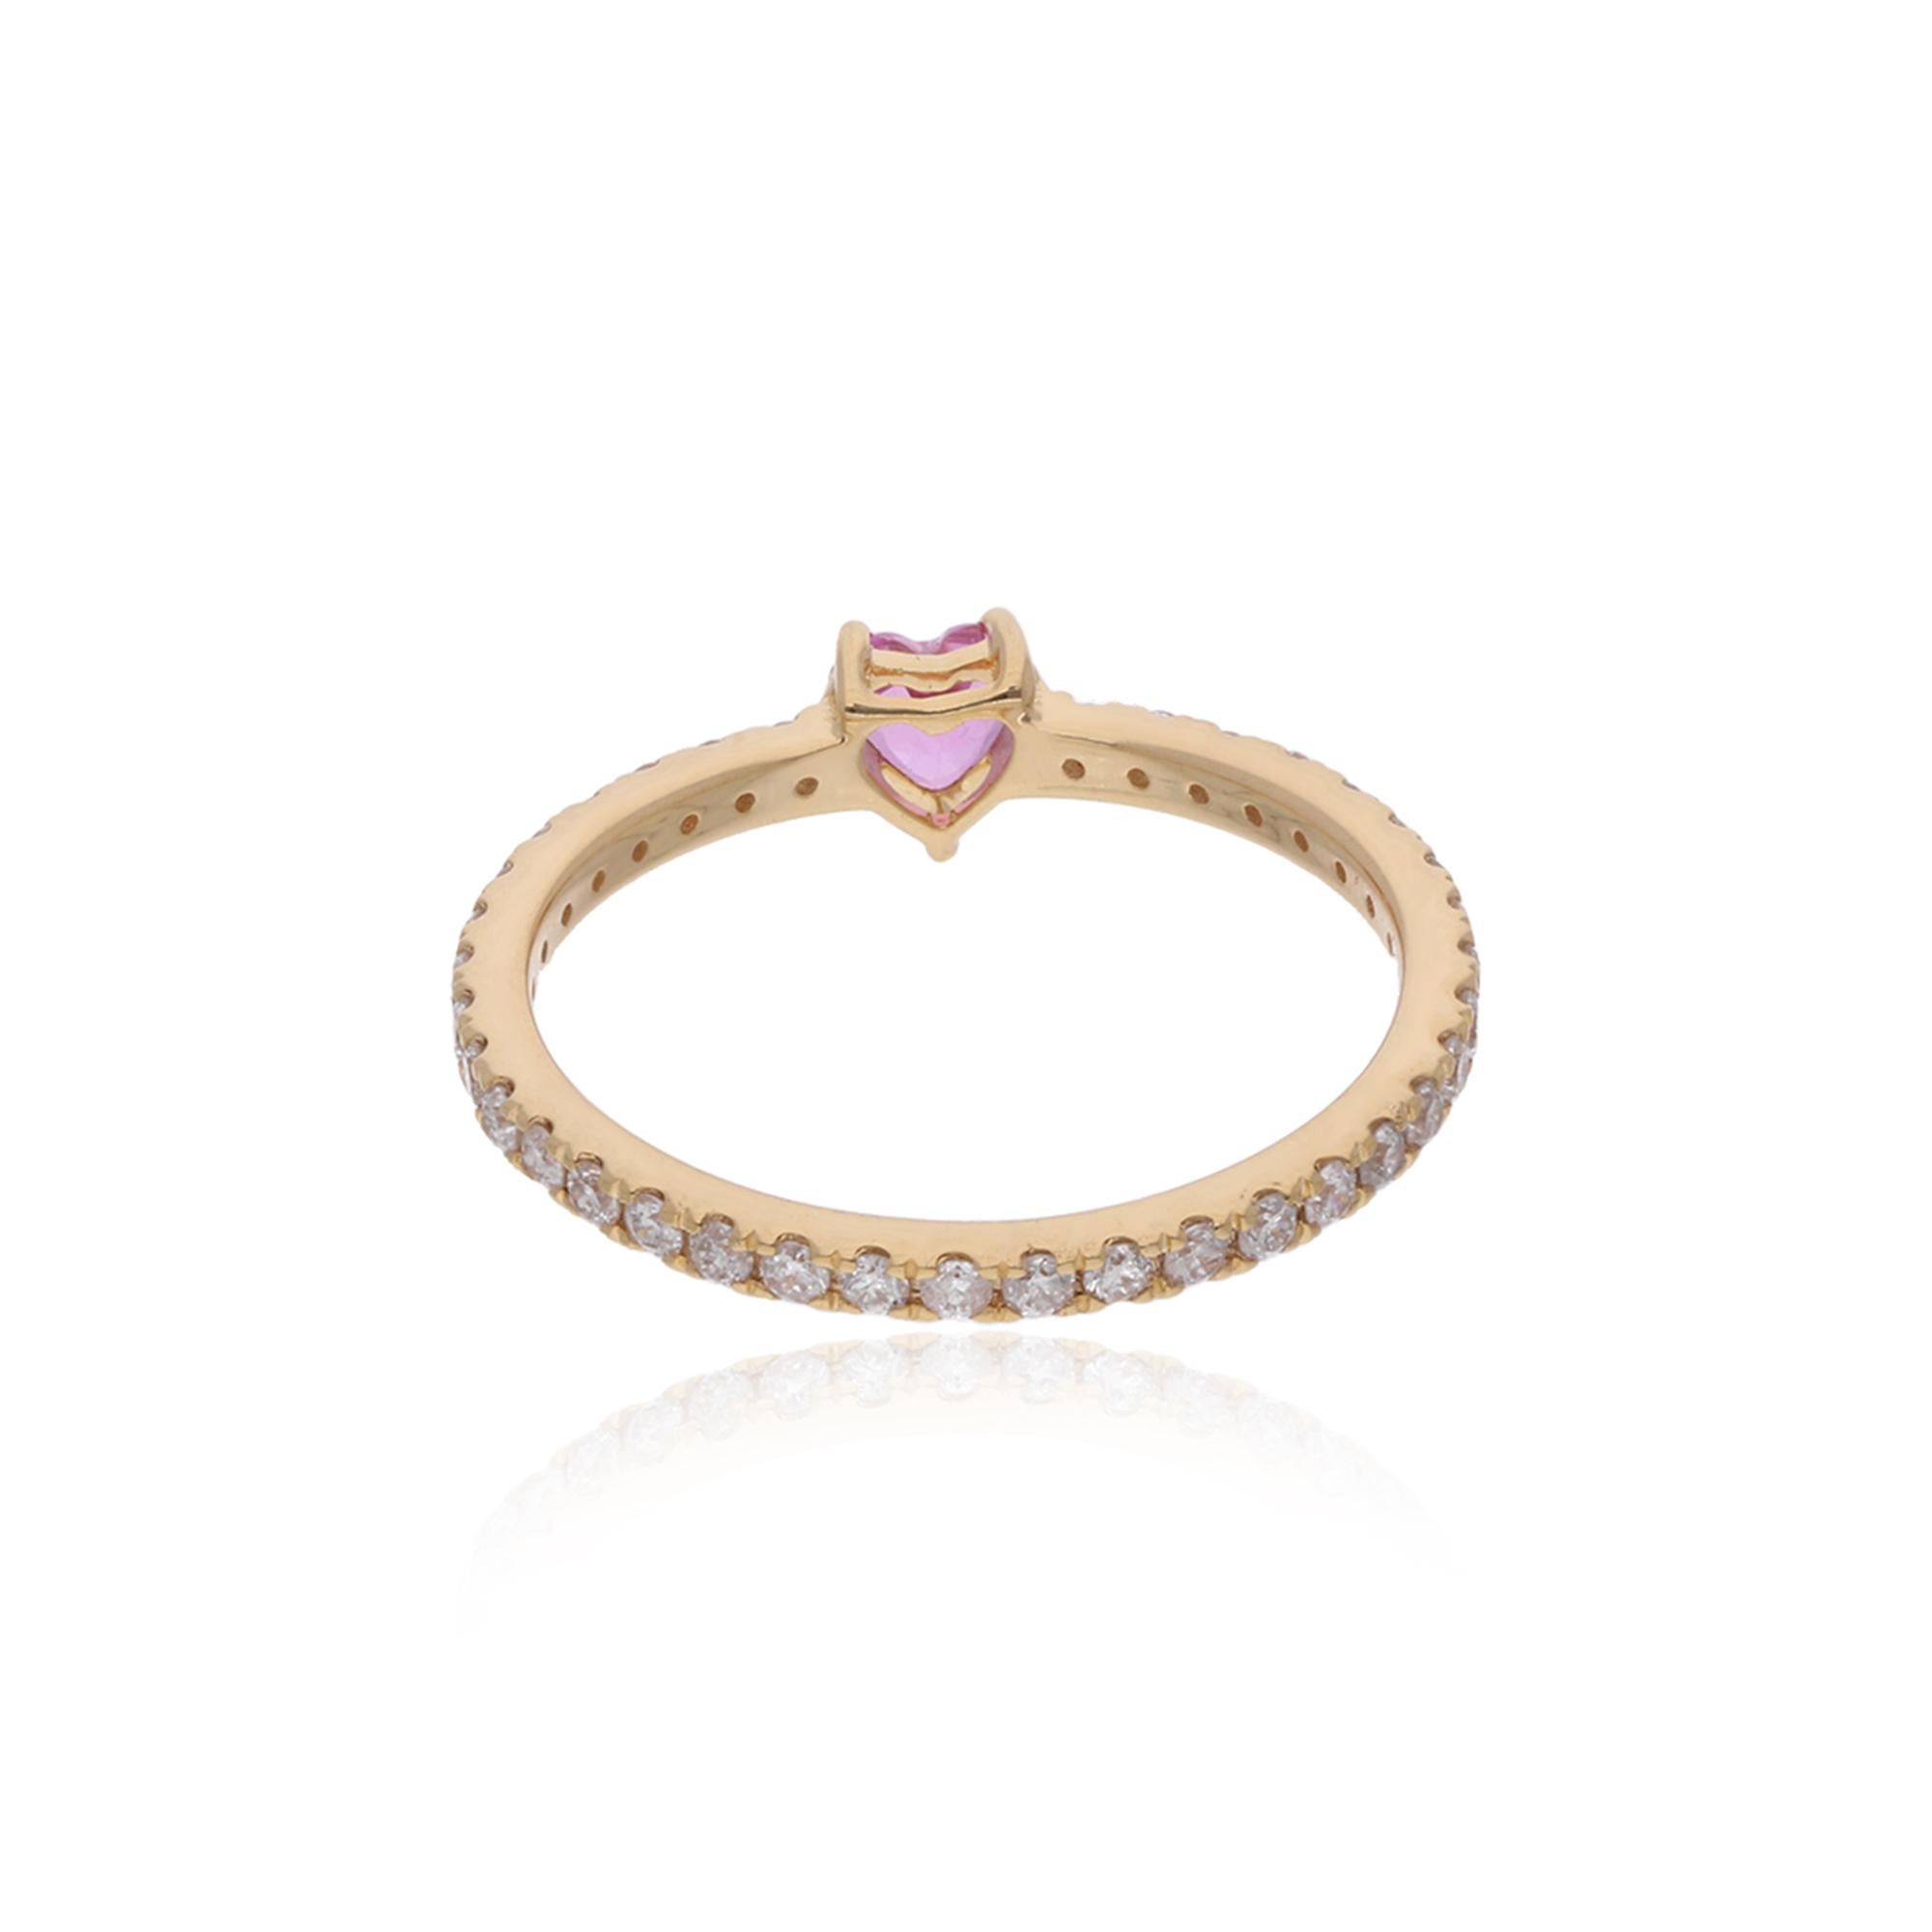 Item Code :- SFR-2030K
Gross Wt. :- 1.31 gm
14k Yellow Gold Wt. :- 1.18 gm
Natural Diamond Wt. :- 0.40 Ct.  ( AVERAGE DIAMOND CLARITY SI1-SI2 & COLOR H-I )
Pink Sapphire Wt. :- 0.27 Ct.
Ring Size :- 7 US & All size available

✦